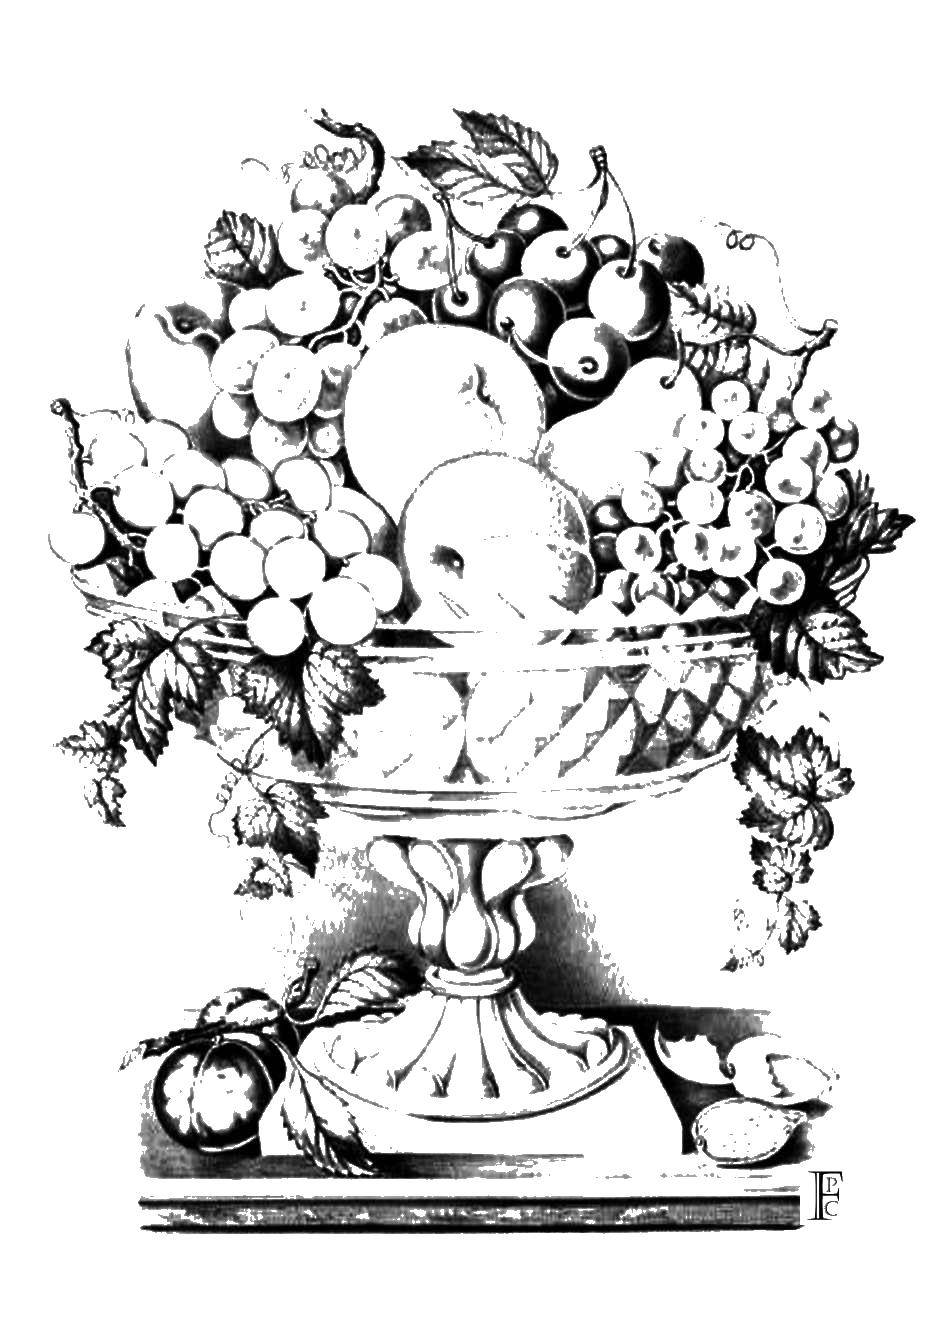 Coloring Vase of fruit. Category fruits. Tags:  vase, peach, Apple, pear, grapes.